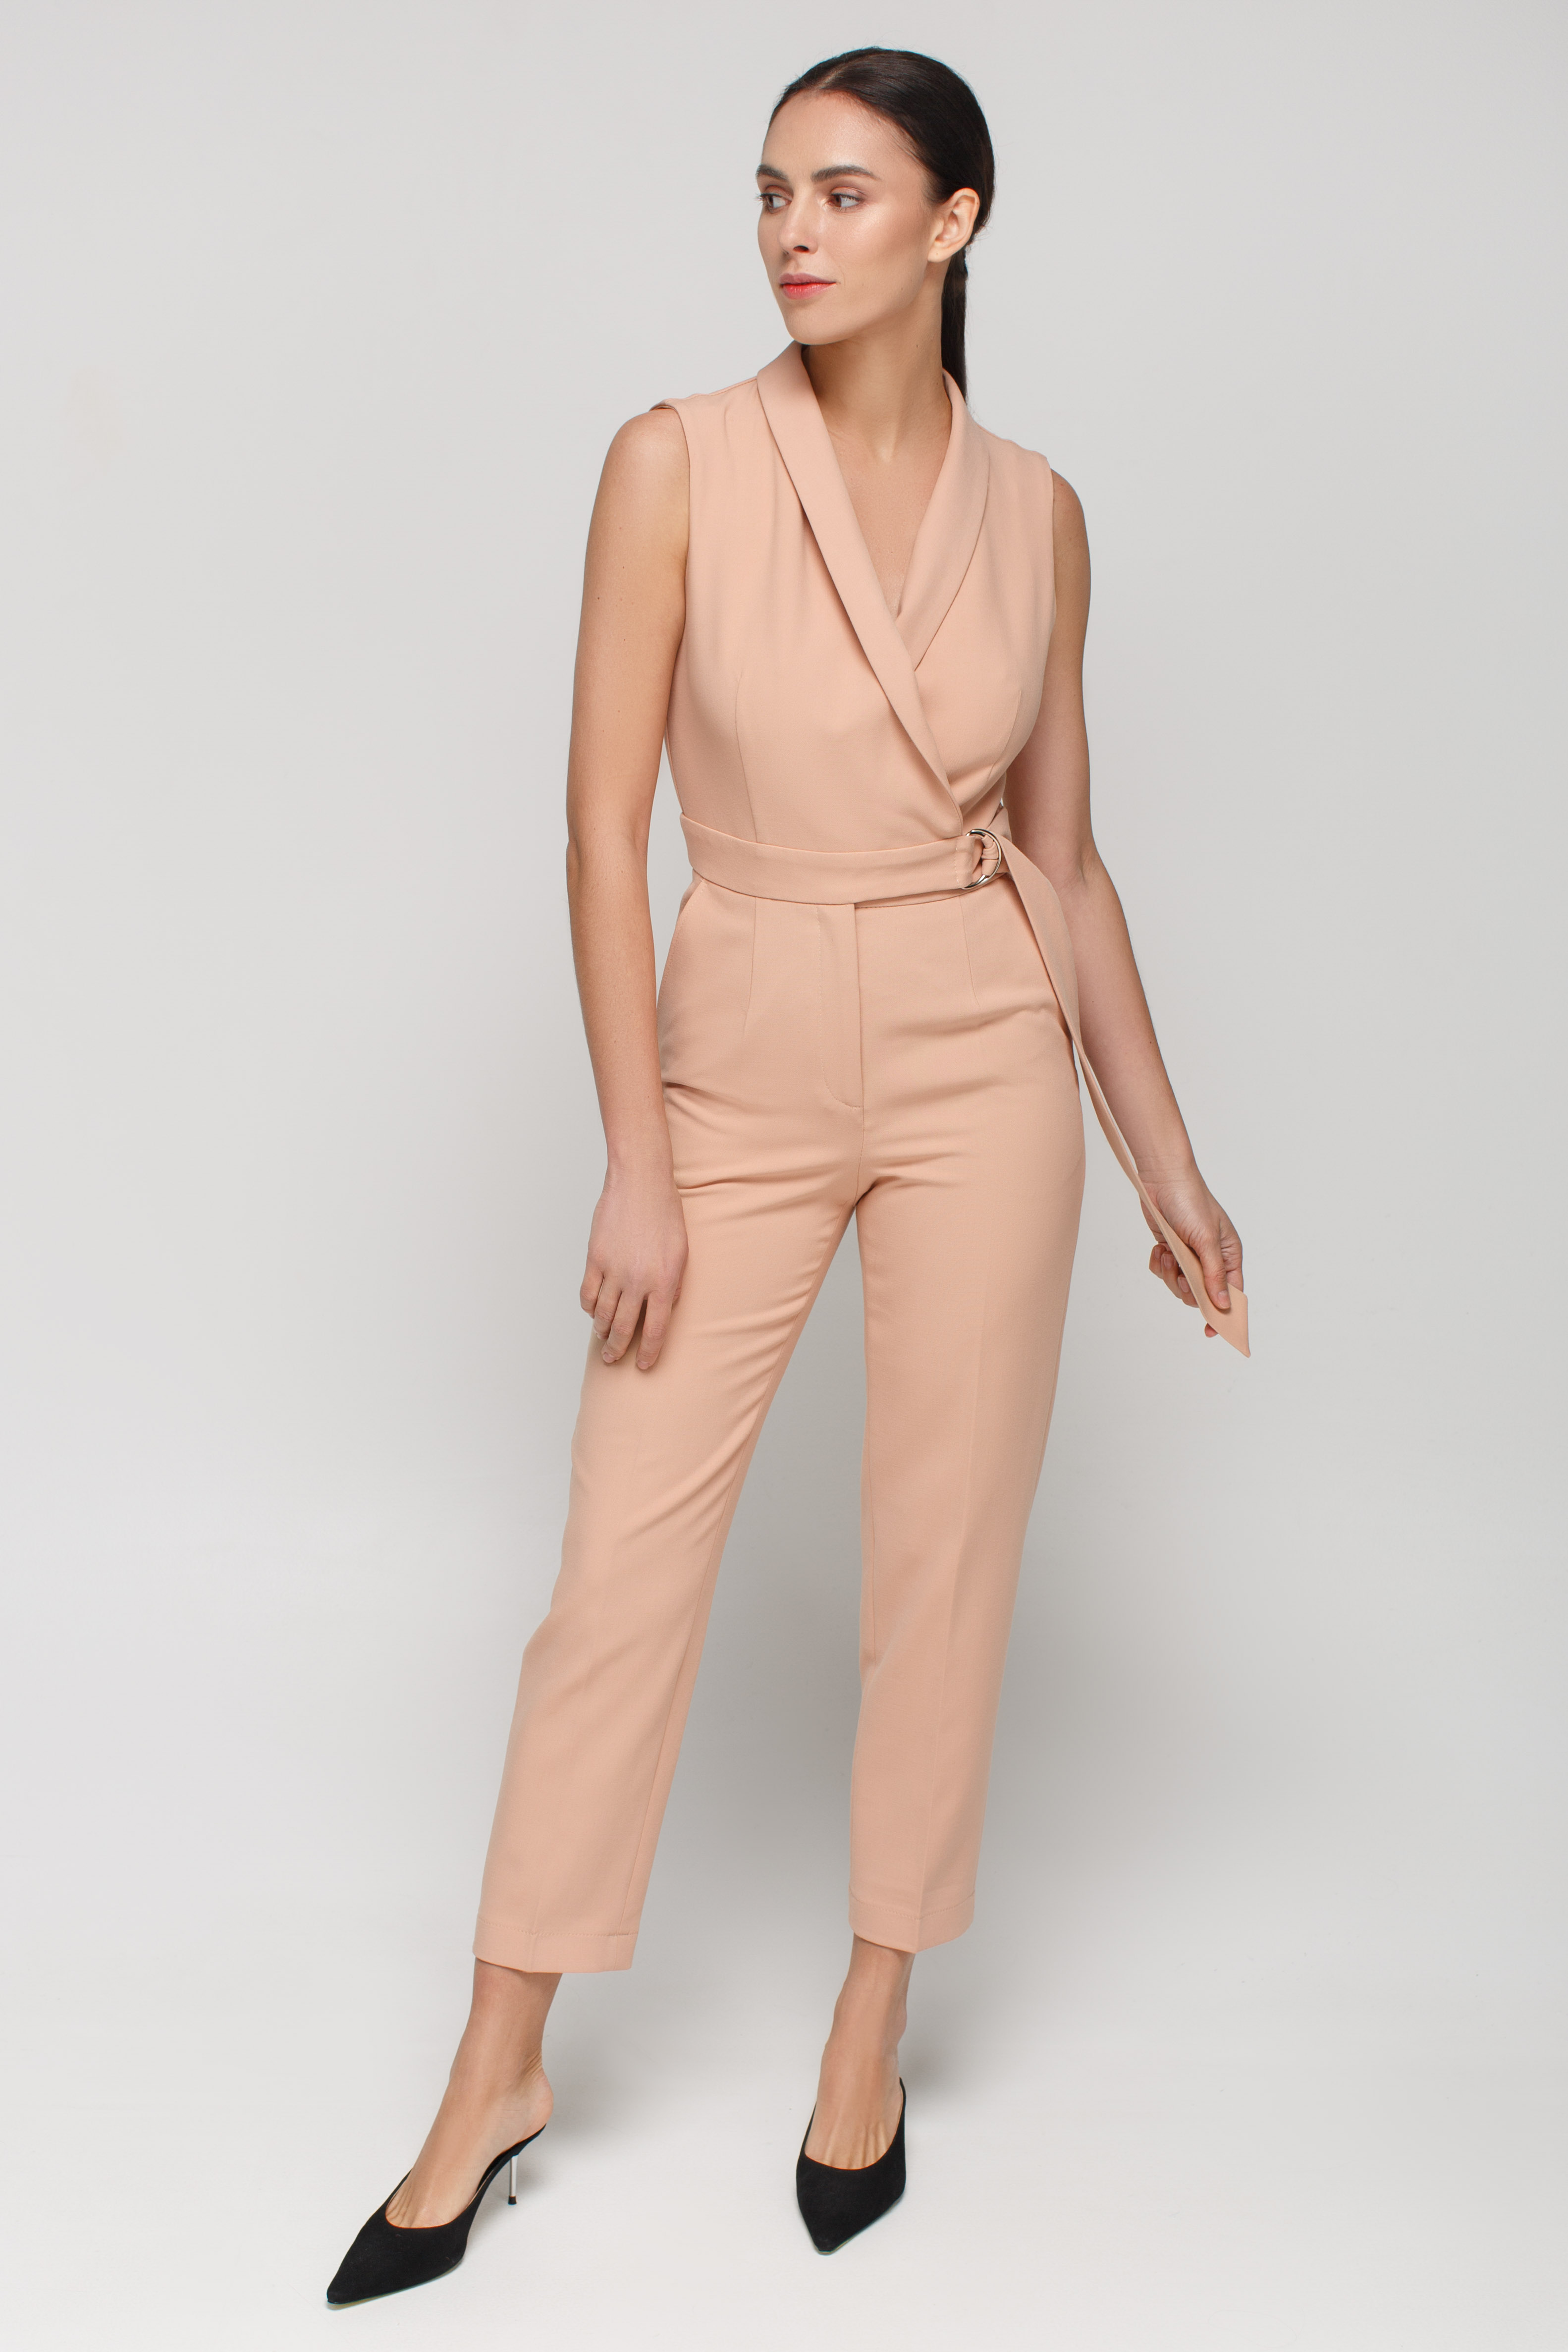 Beige jumpsuit with belt and shawl collar, photo 1